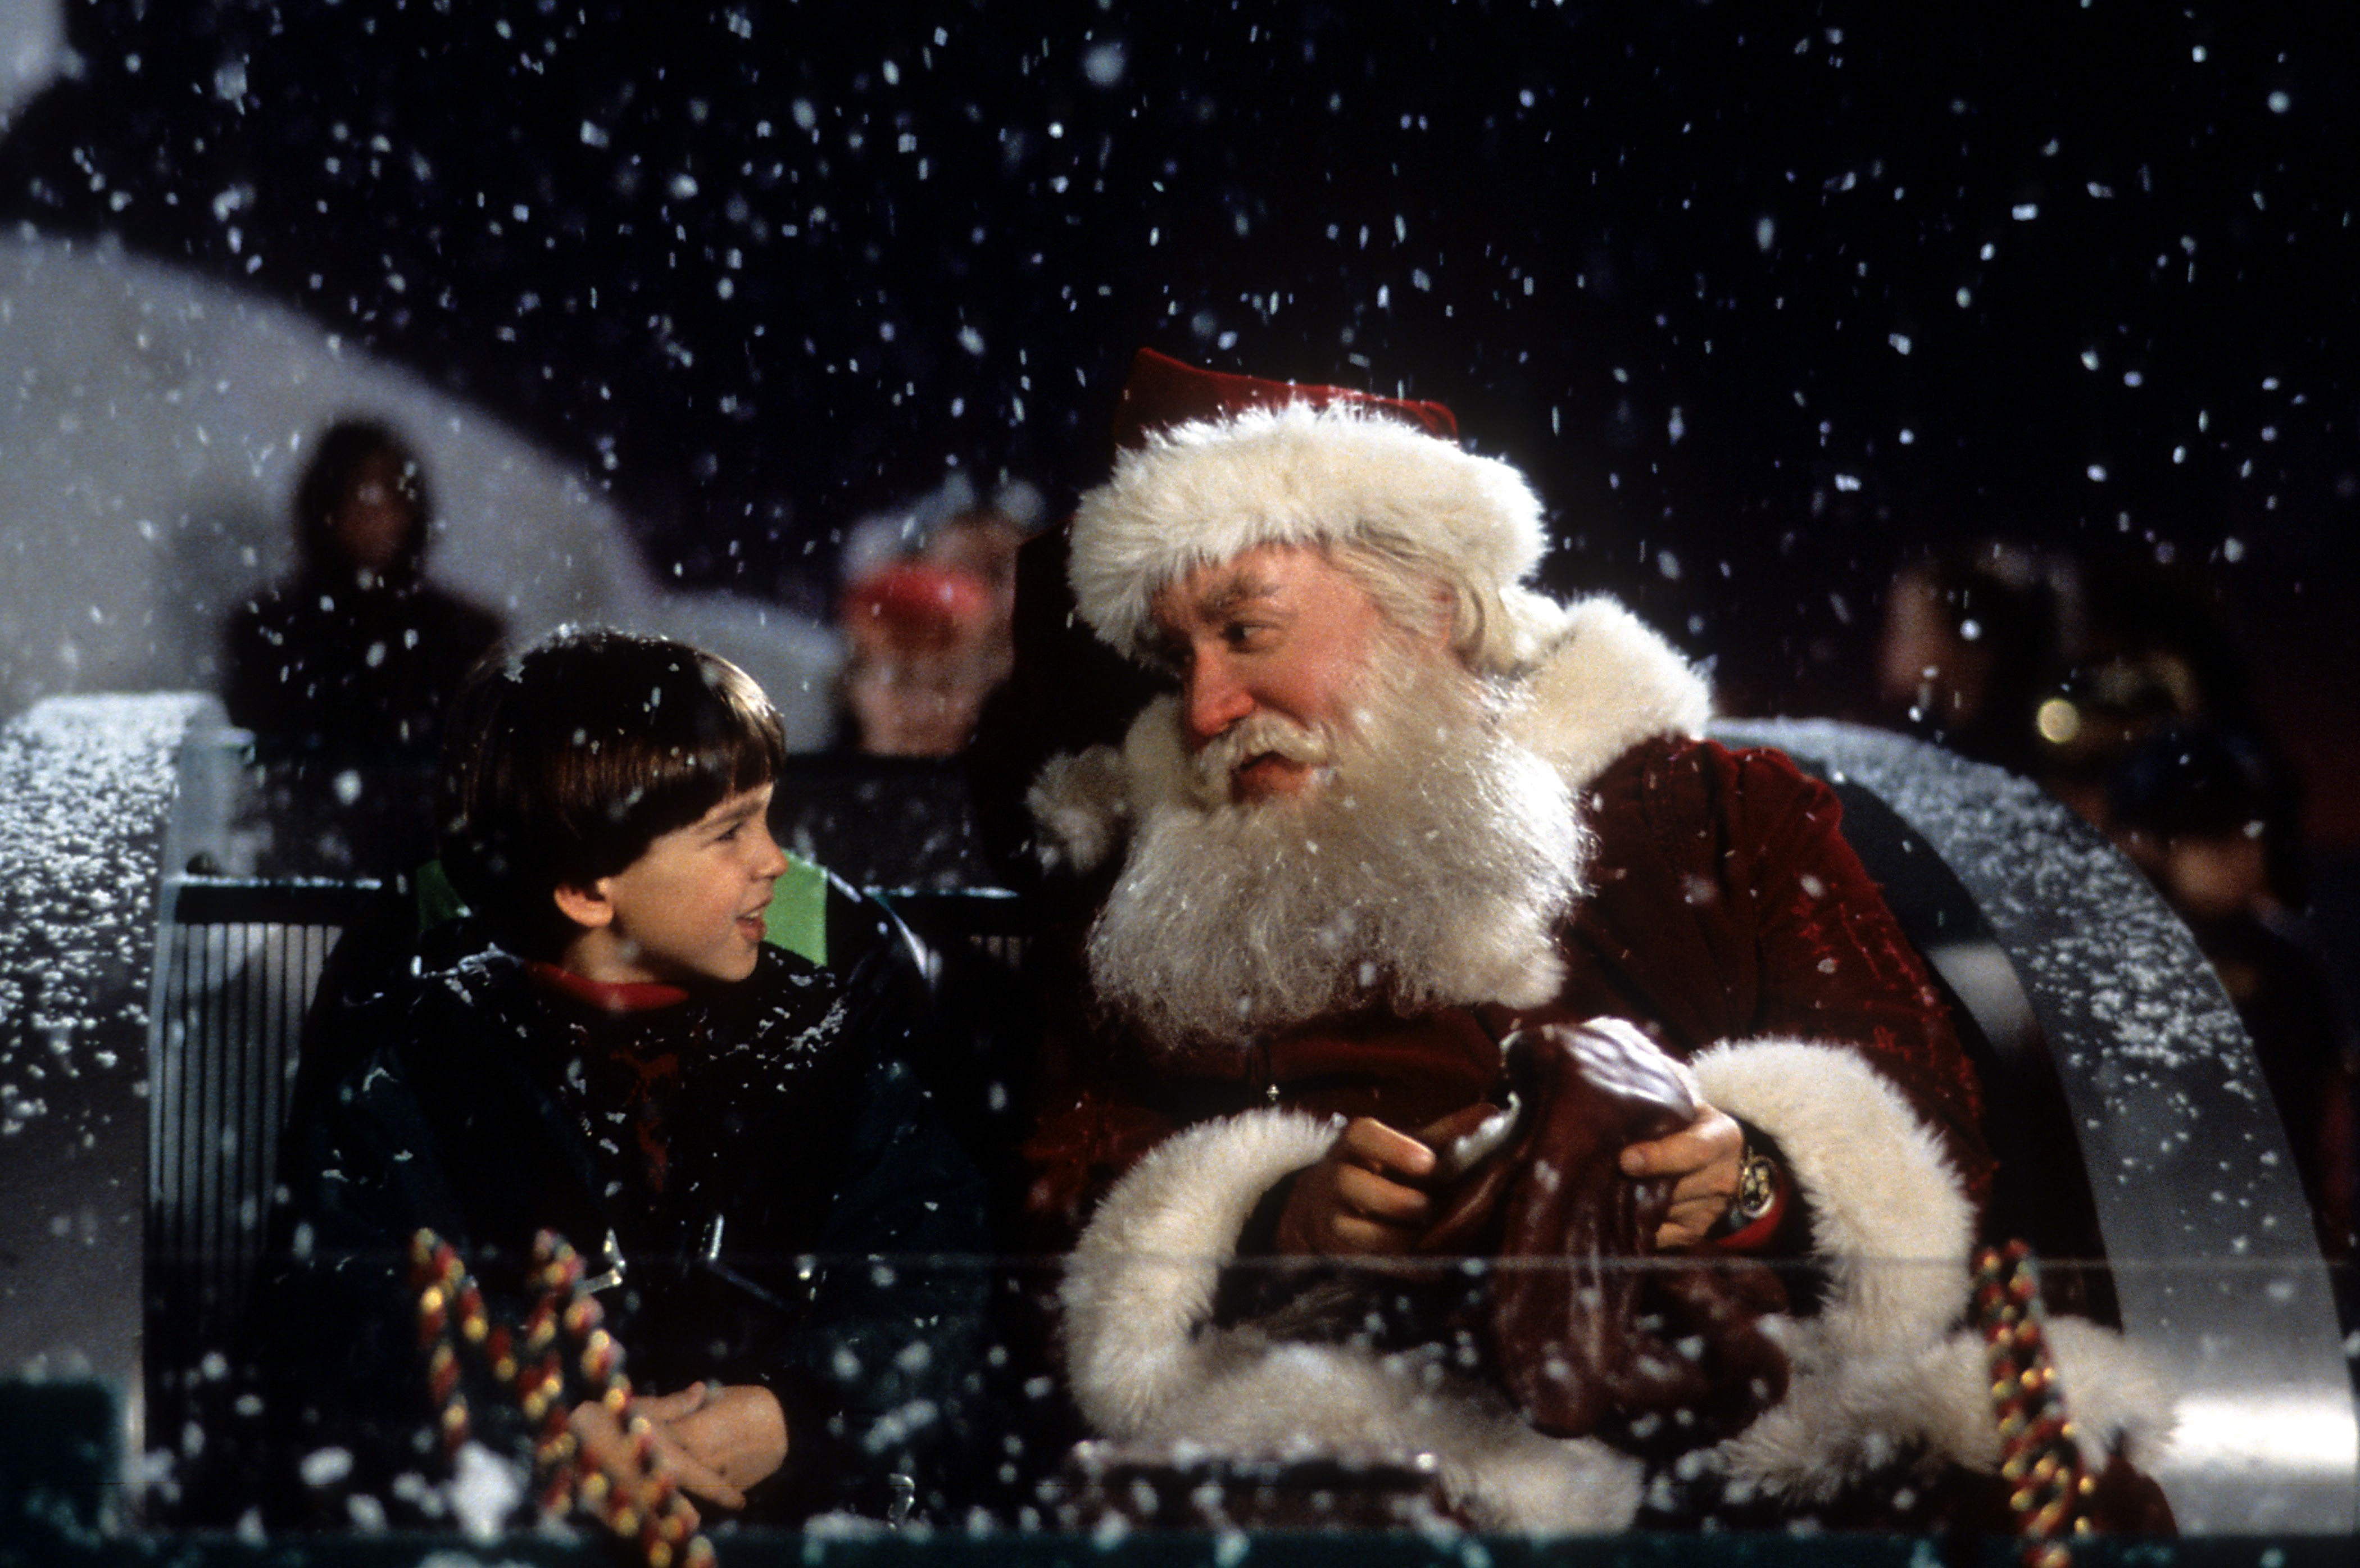 GettyImages-159835955 Tim Allen is Bringing Back ‘The Santa Clause' for a New Series